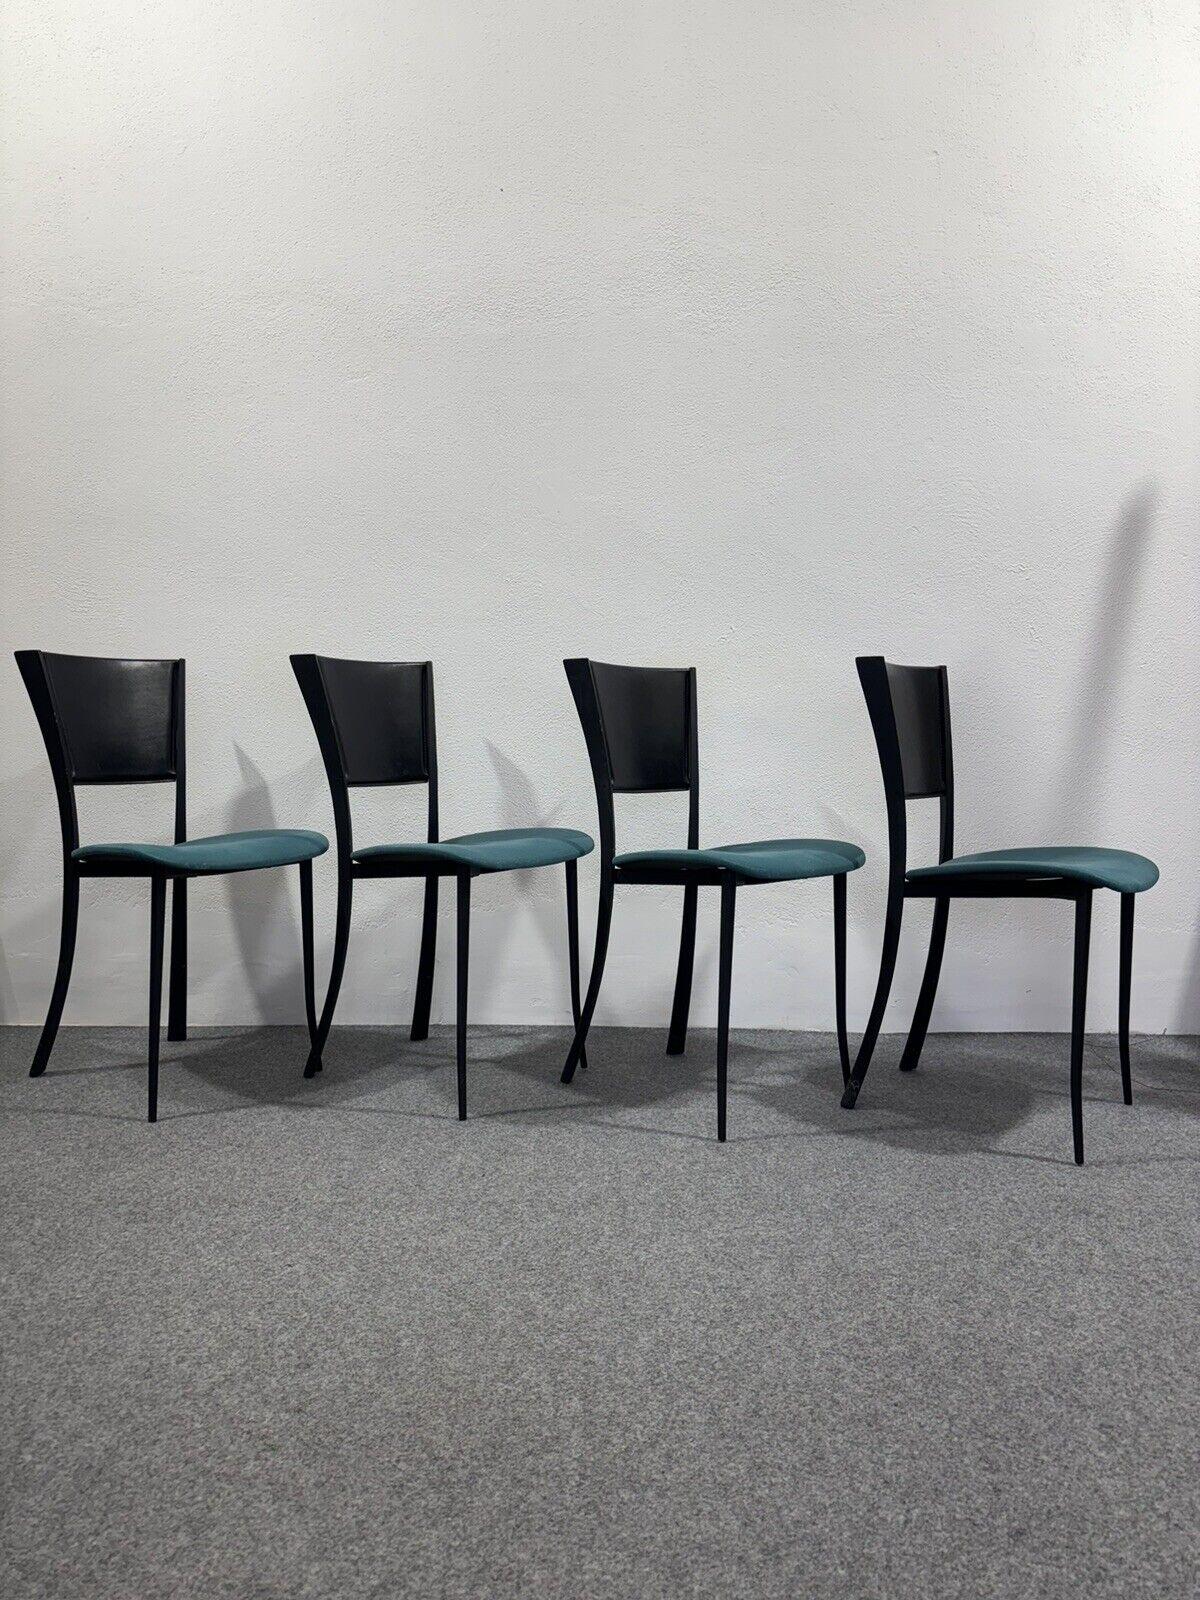 Set Of 4 Postmodern Design Modern Chairs.

Black metal frame, Back covered in leather, seat in teal fabric.

The item is in excellent conservative condition. Only slight and obvious signs of time due to use and age.

Height 82cm

Width 42 cm

DEPTH